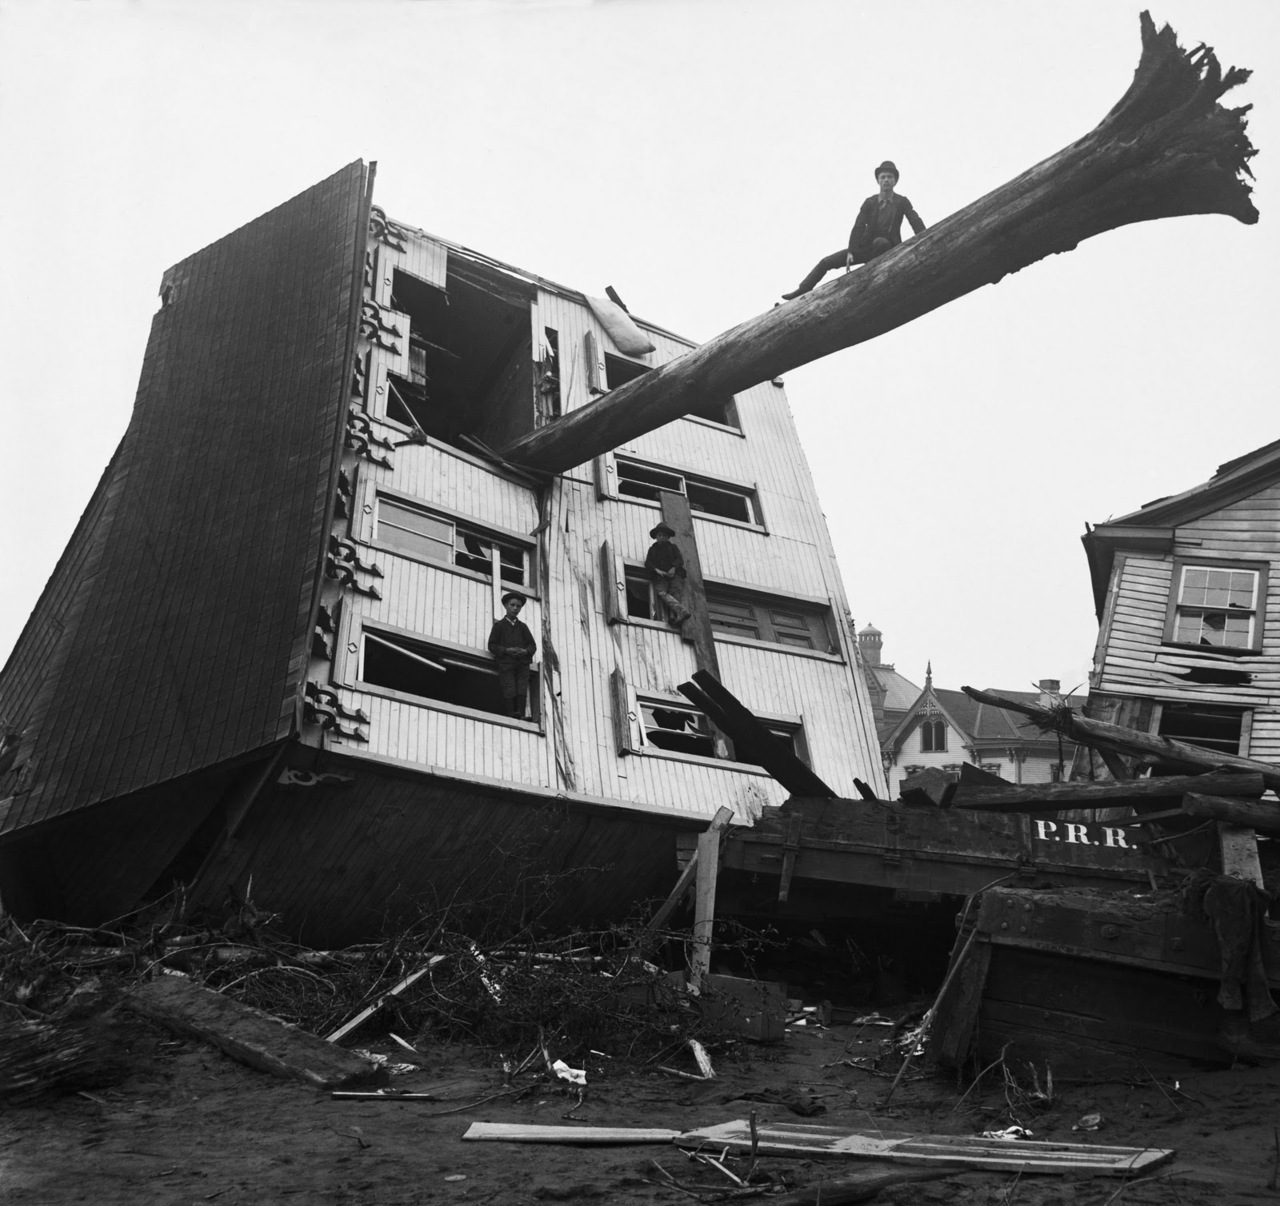 A house that was skewered by a huge tree uprooted by the Johnstown Flood that was caused by the catastrophic failure of the South Fork Dam, 1889